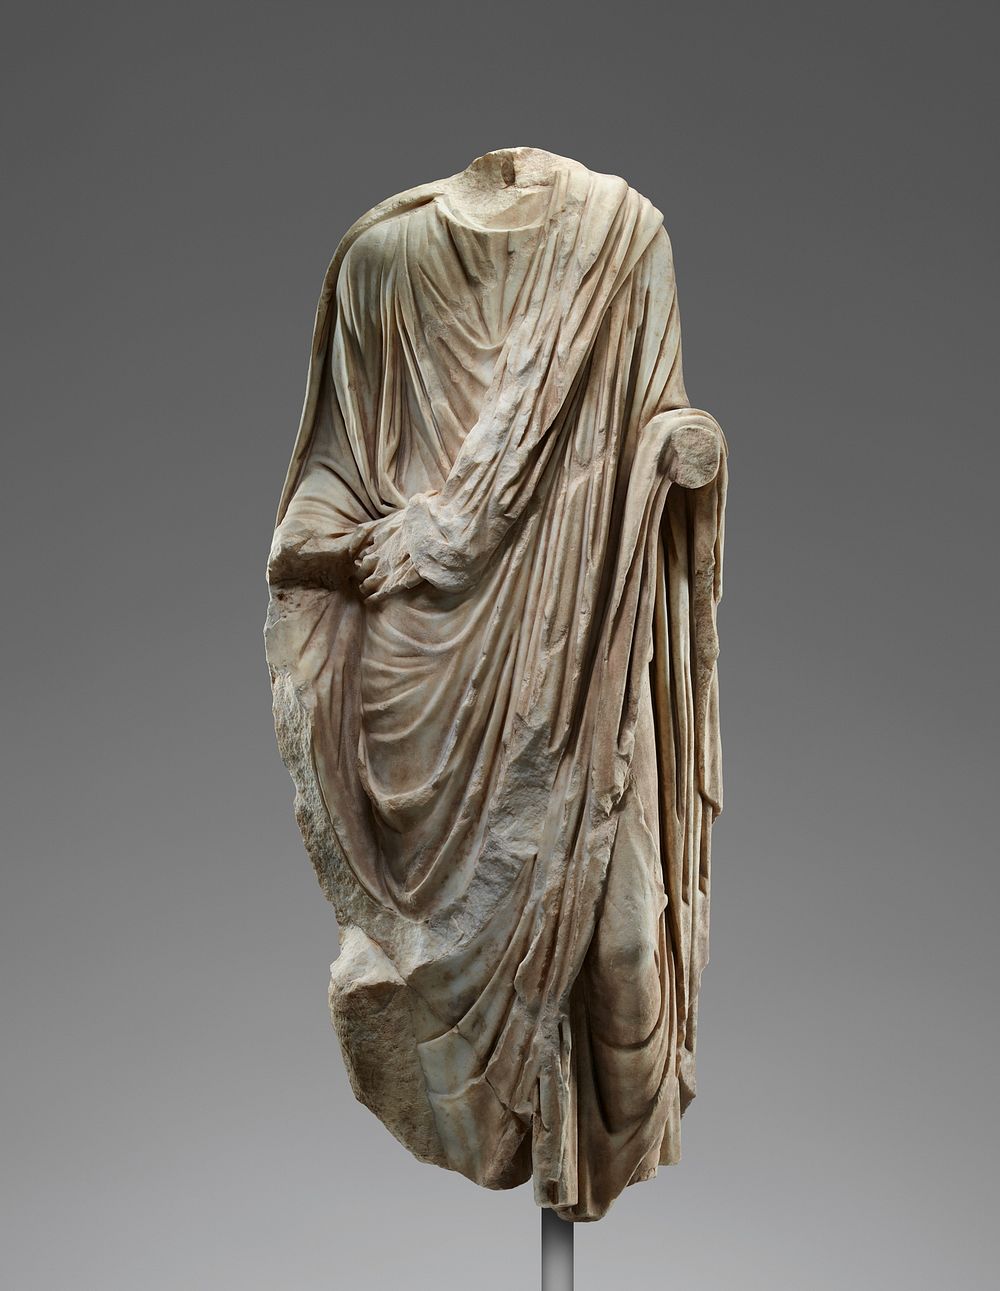 Statue of a Man Wearing a Toga